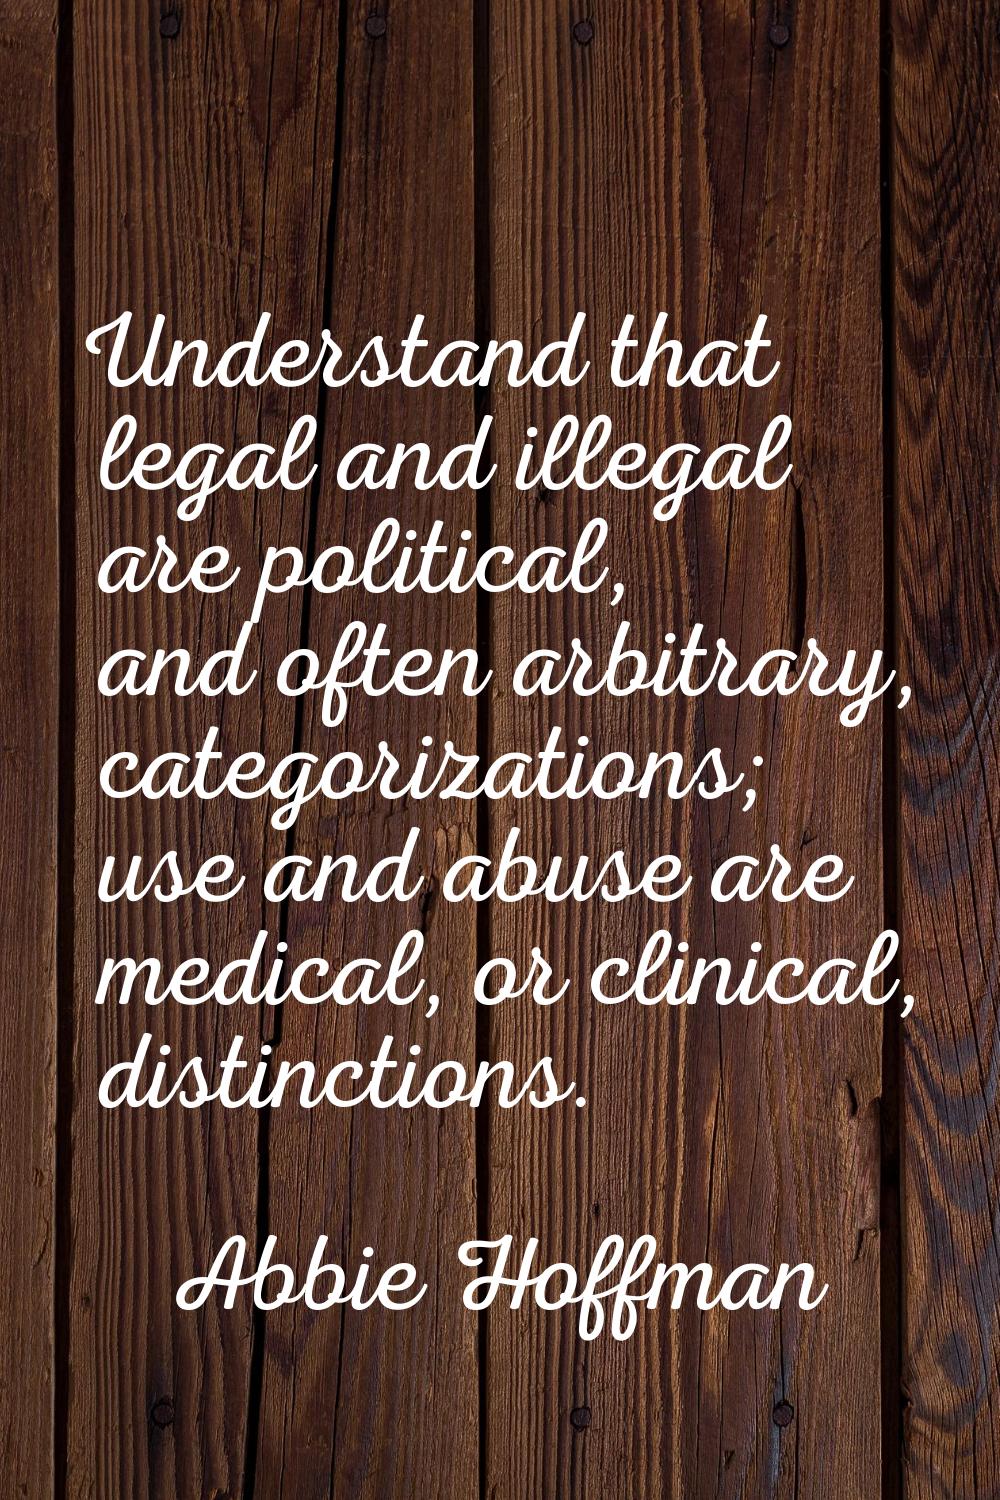 Understand that legal and illegal are political, and often arbitrary, categorizations; use and abus